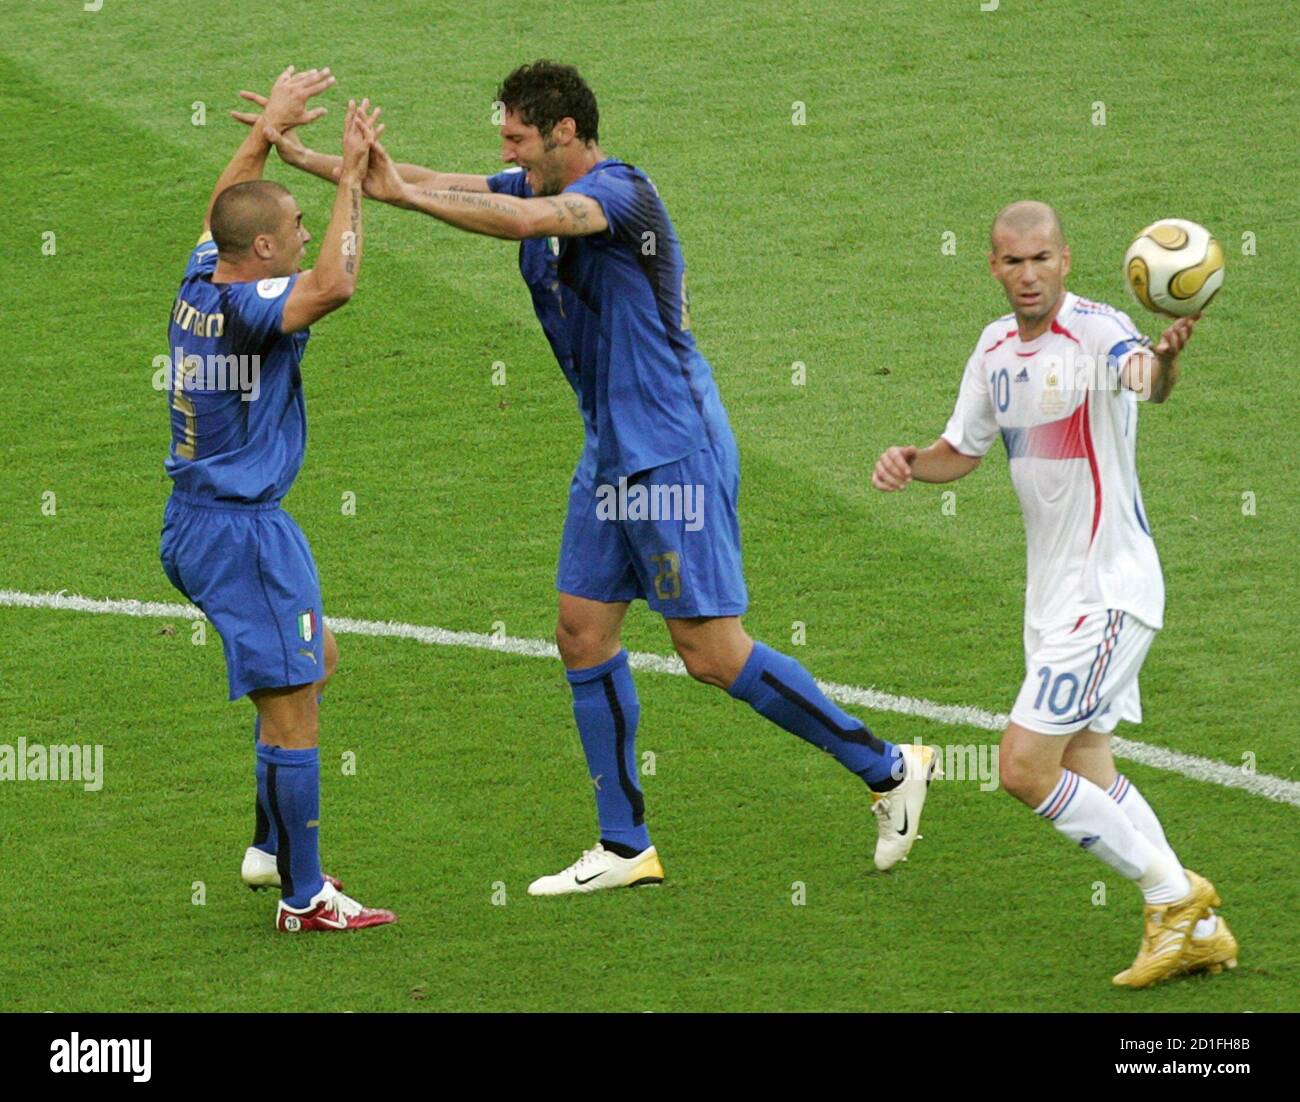 Italy S Marco Materazzi C Celebrates With Team Mate Fabio Cannavaro After Scoring Their First Goal As France S Zinedine Zidane Holds The Ball During Their World Cup 2006 Final Soccer Match In Berlin